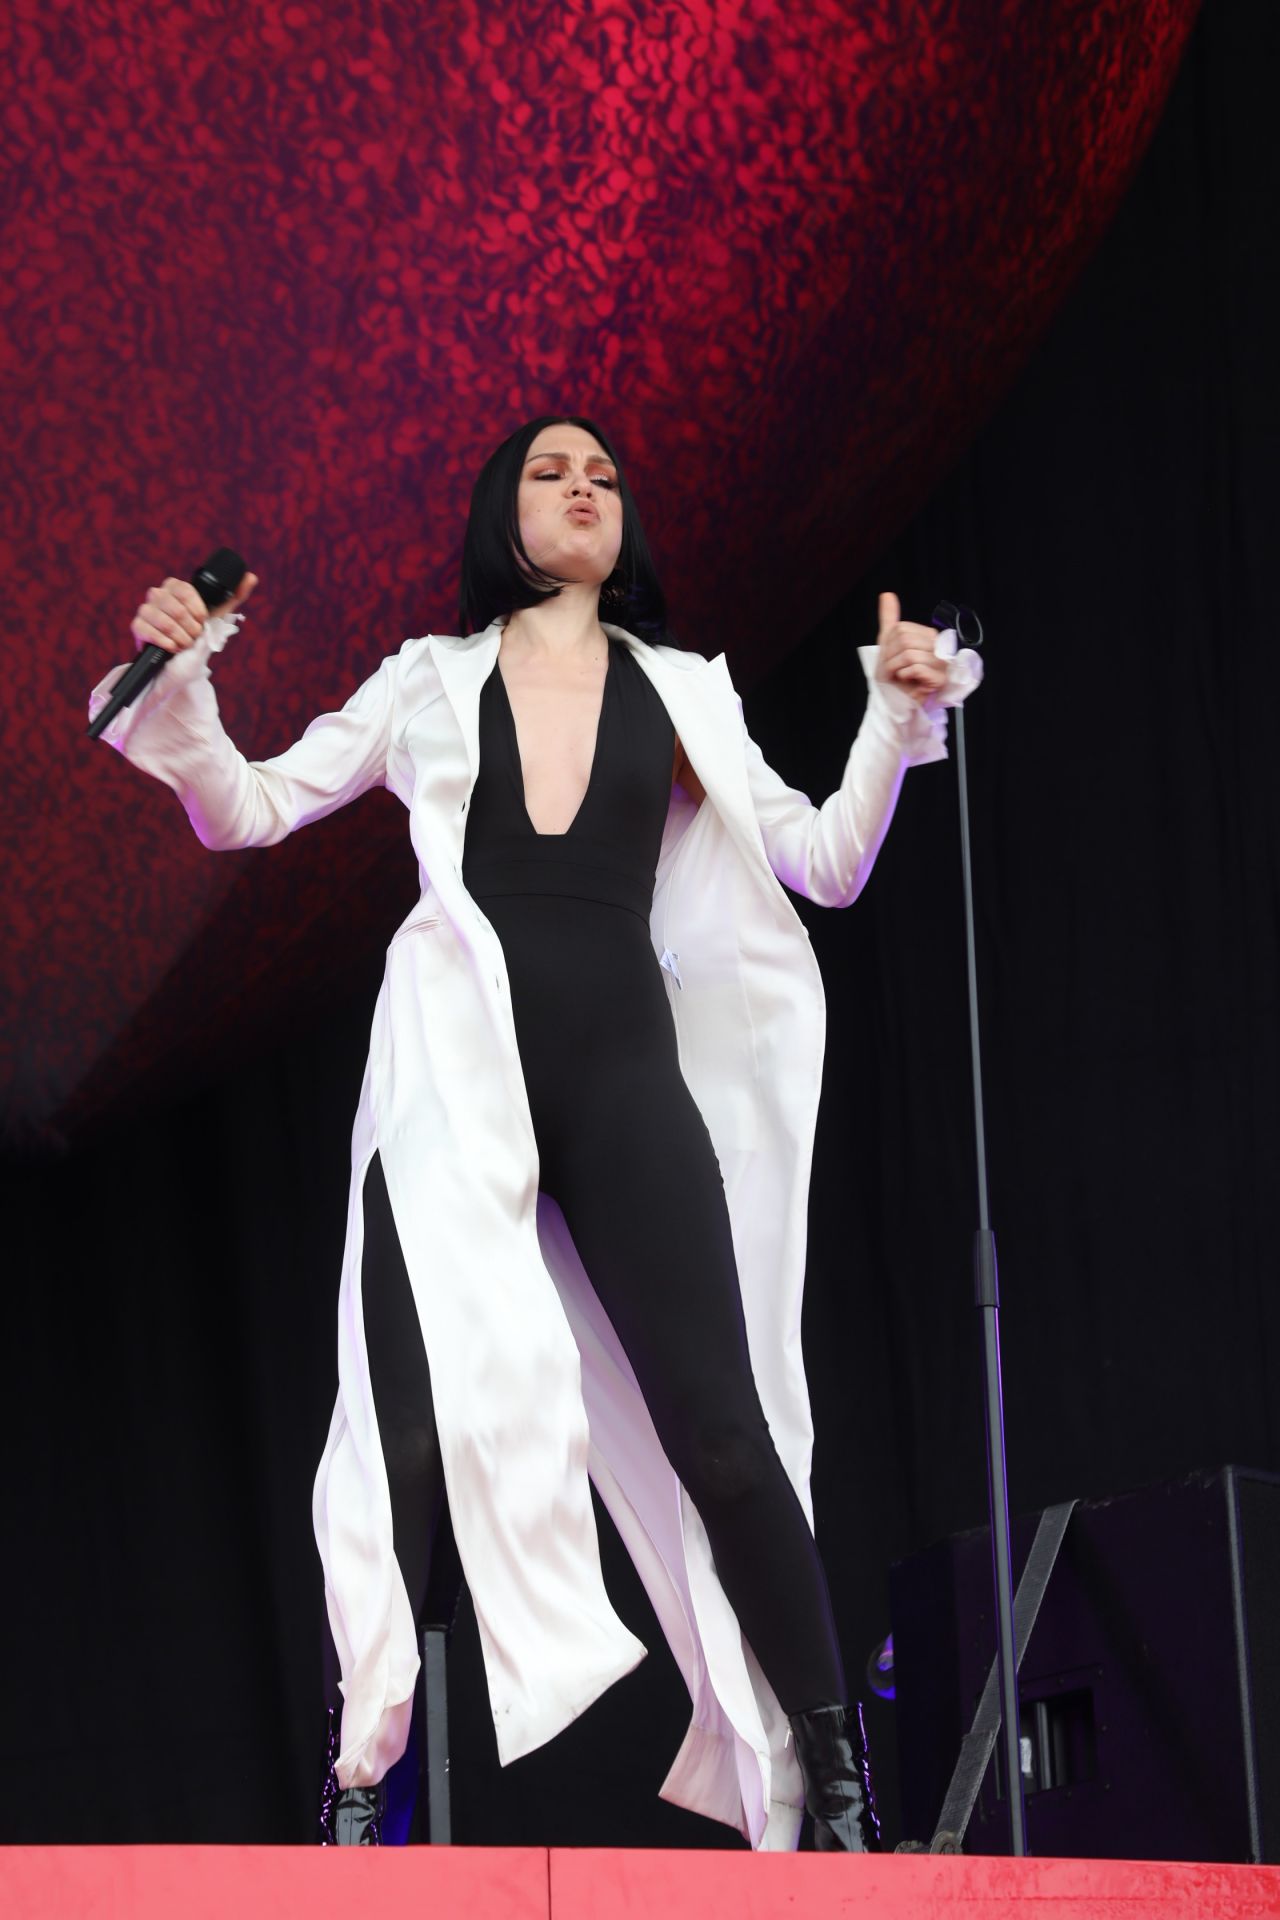 jessie-j-performs-at-the-isle-of-wight-festival-06-23-2018-4.jpg